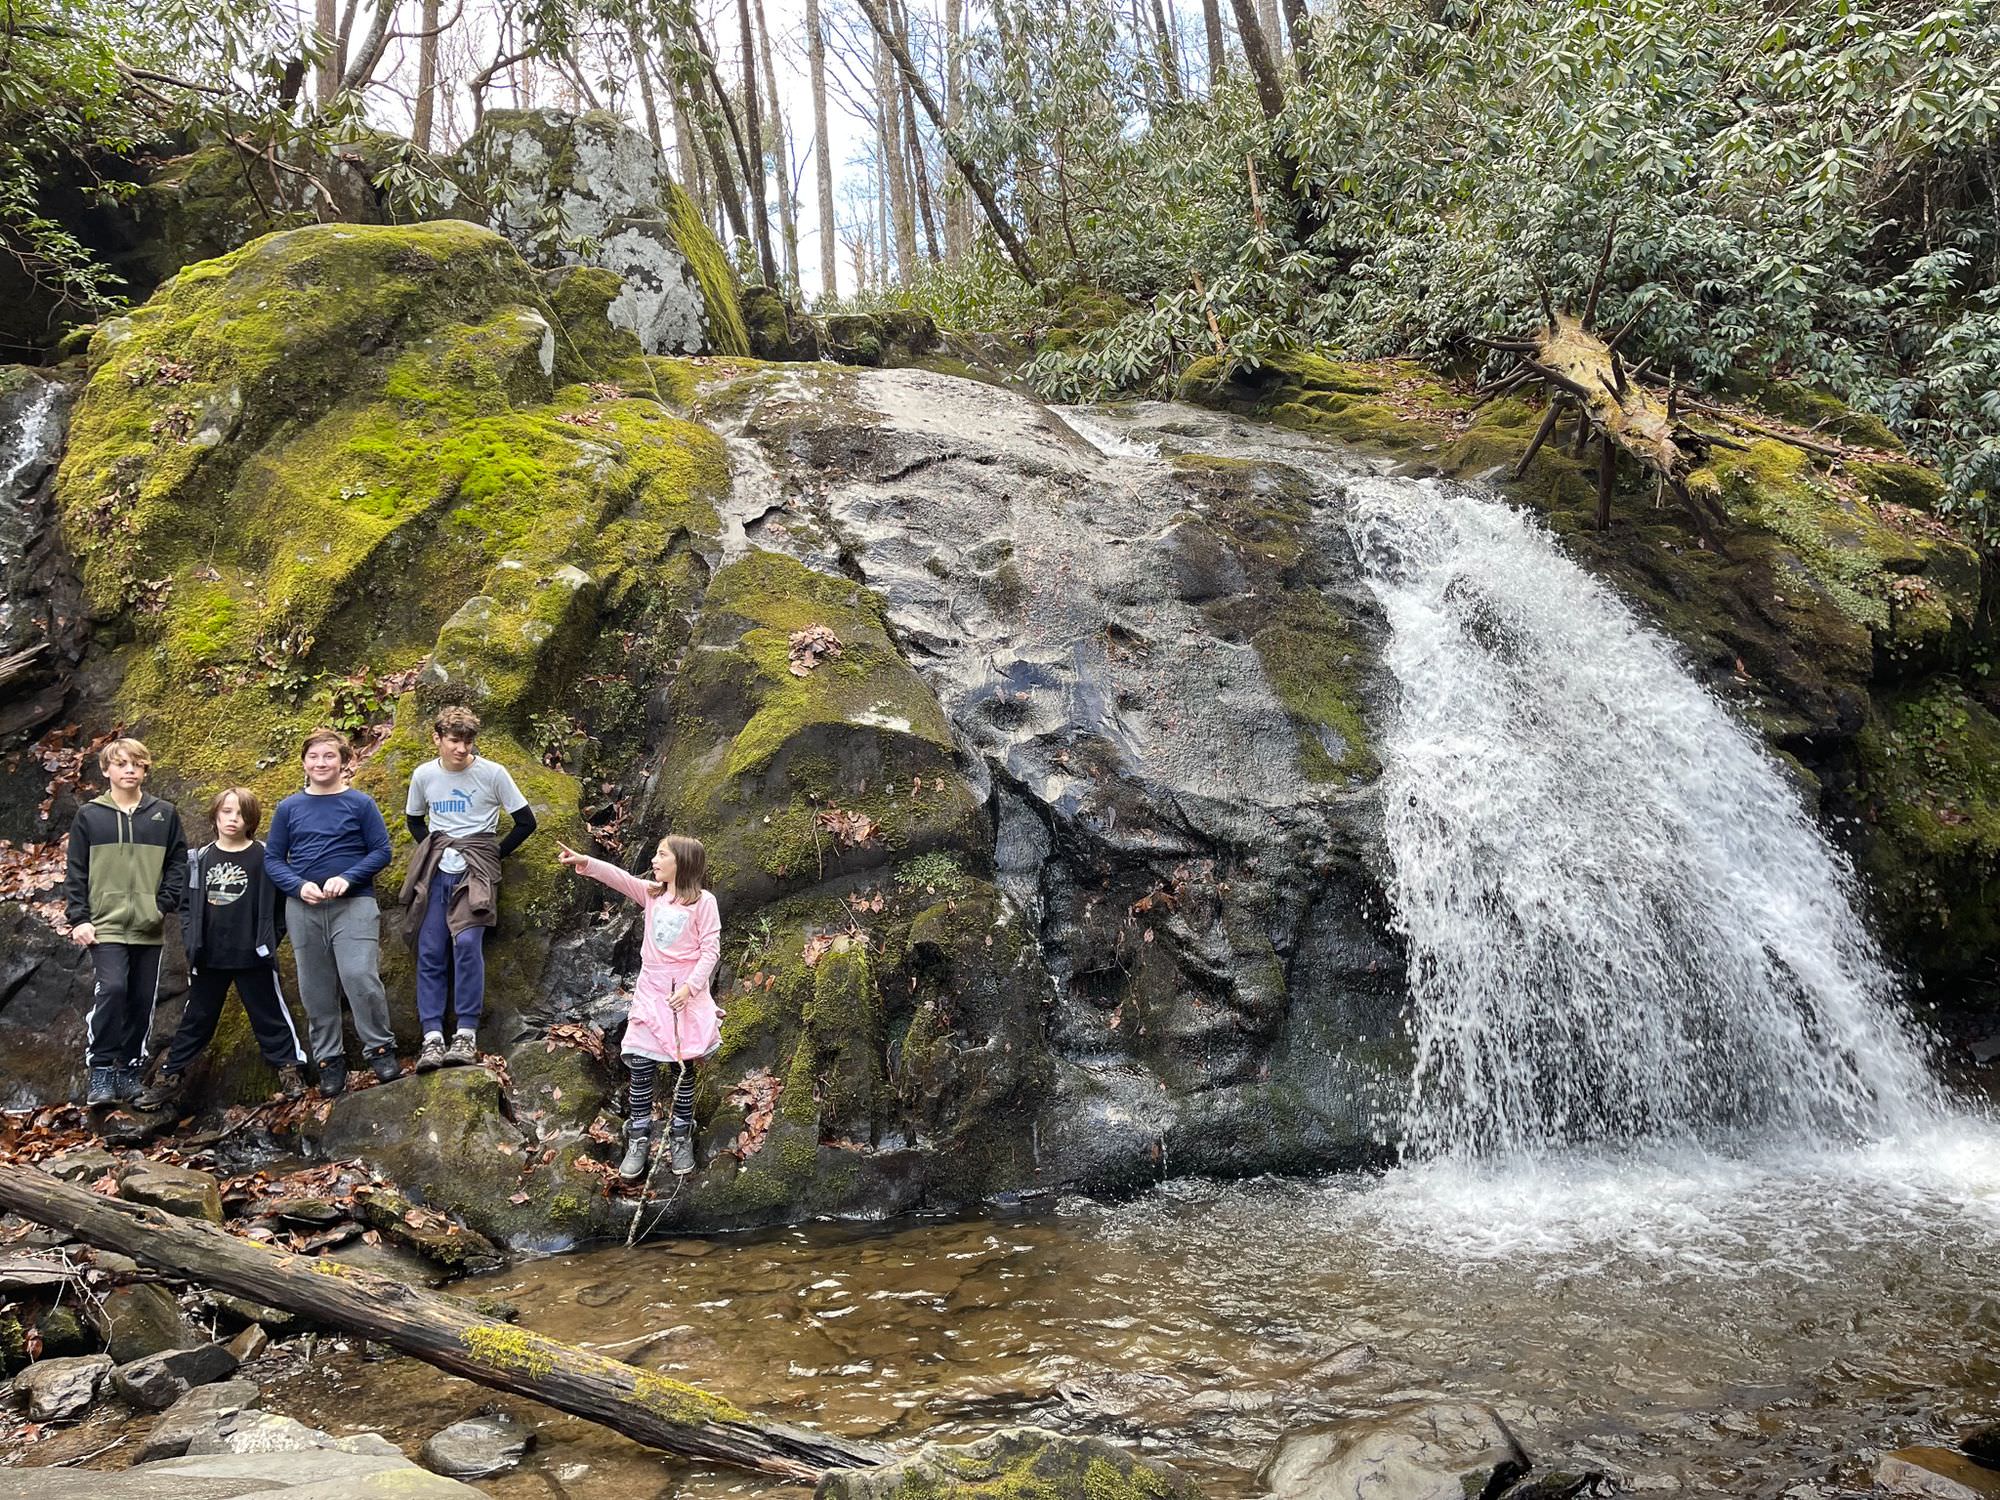 The Sinks and Meigs Creek Cascade Trail